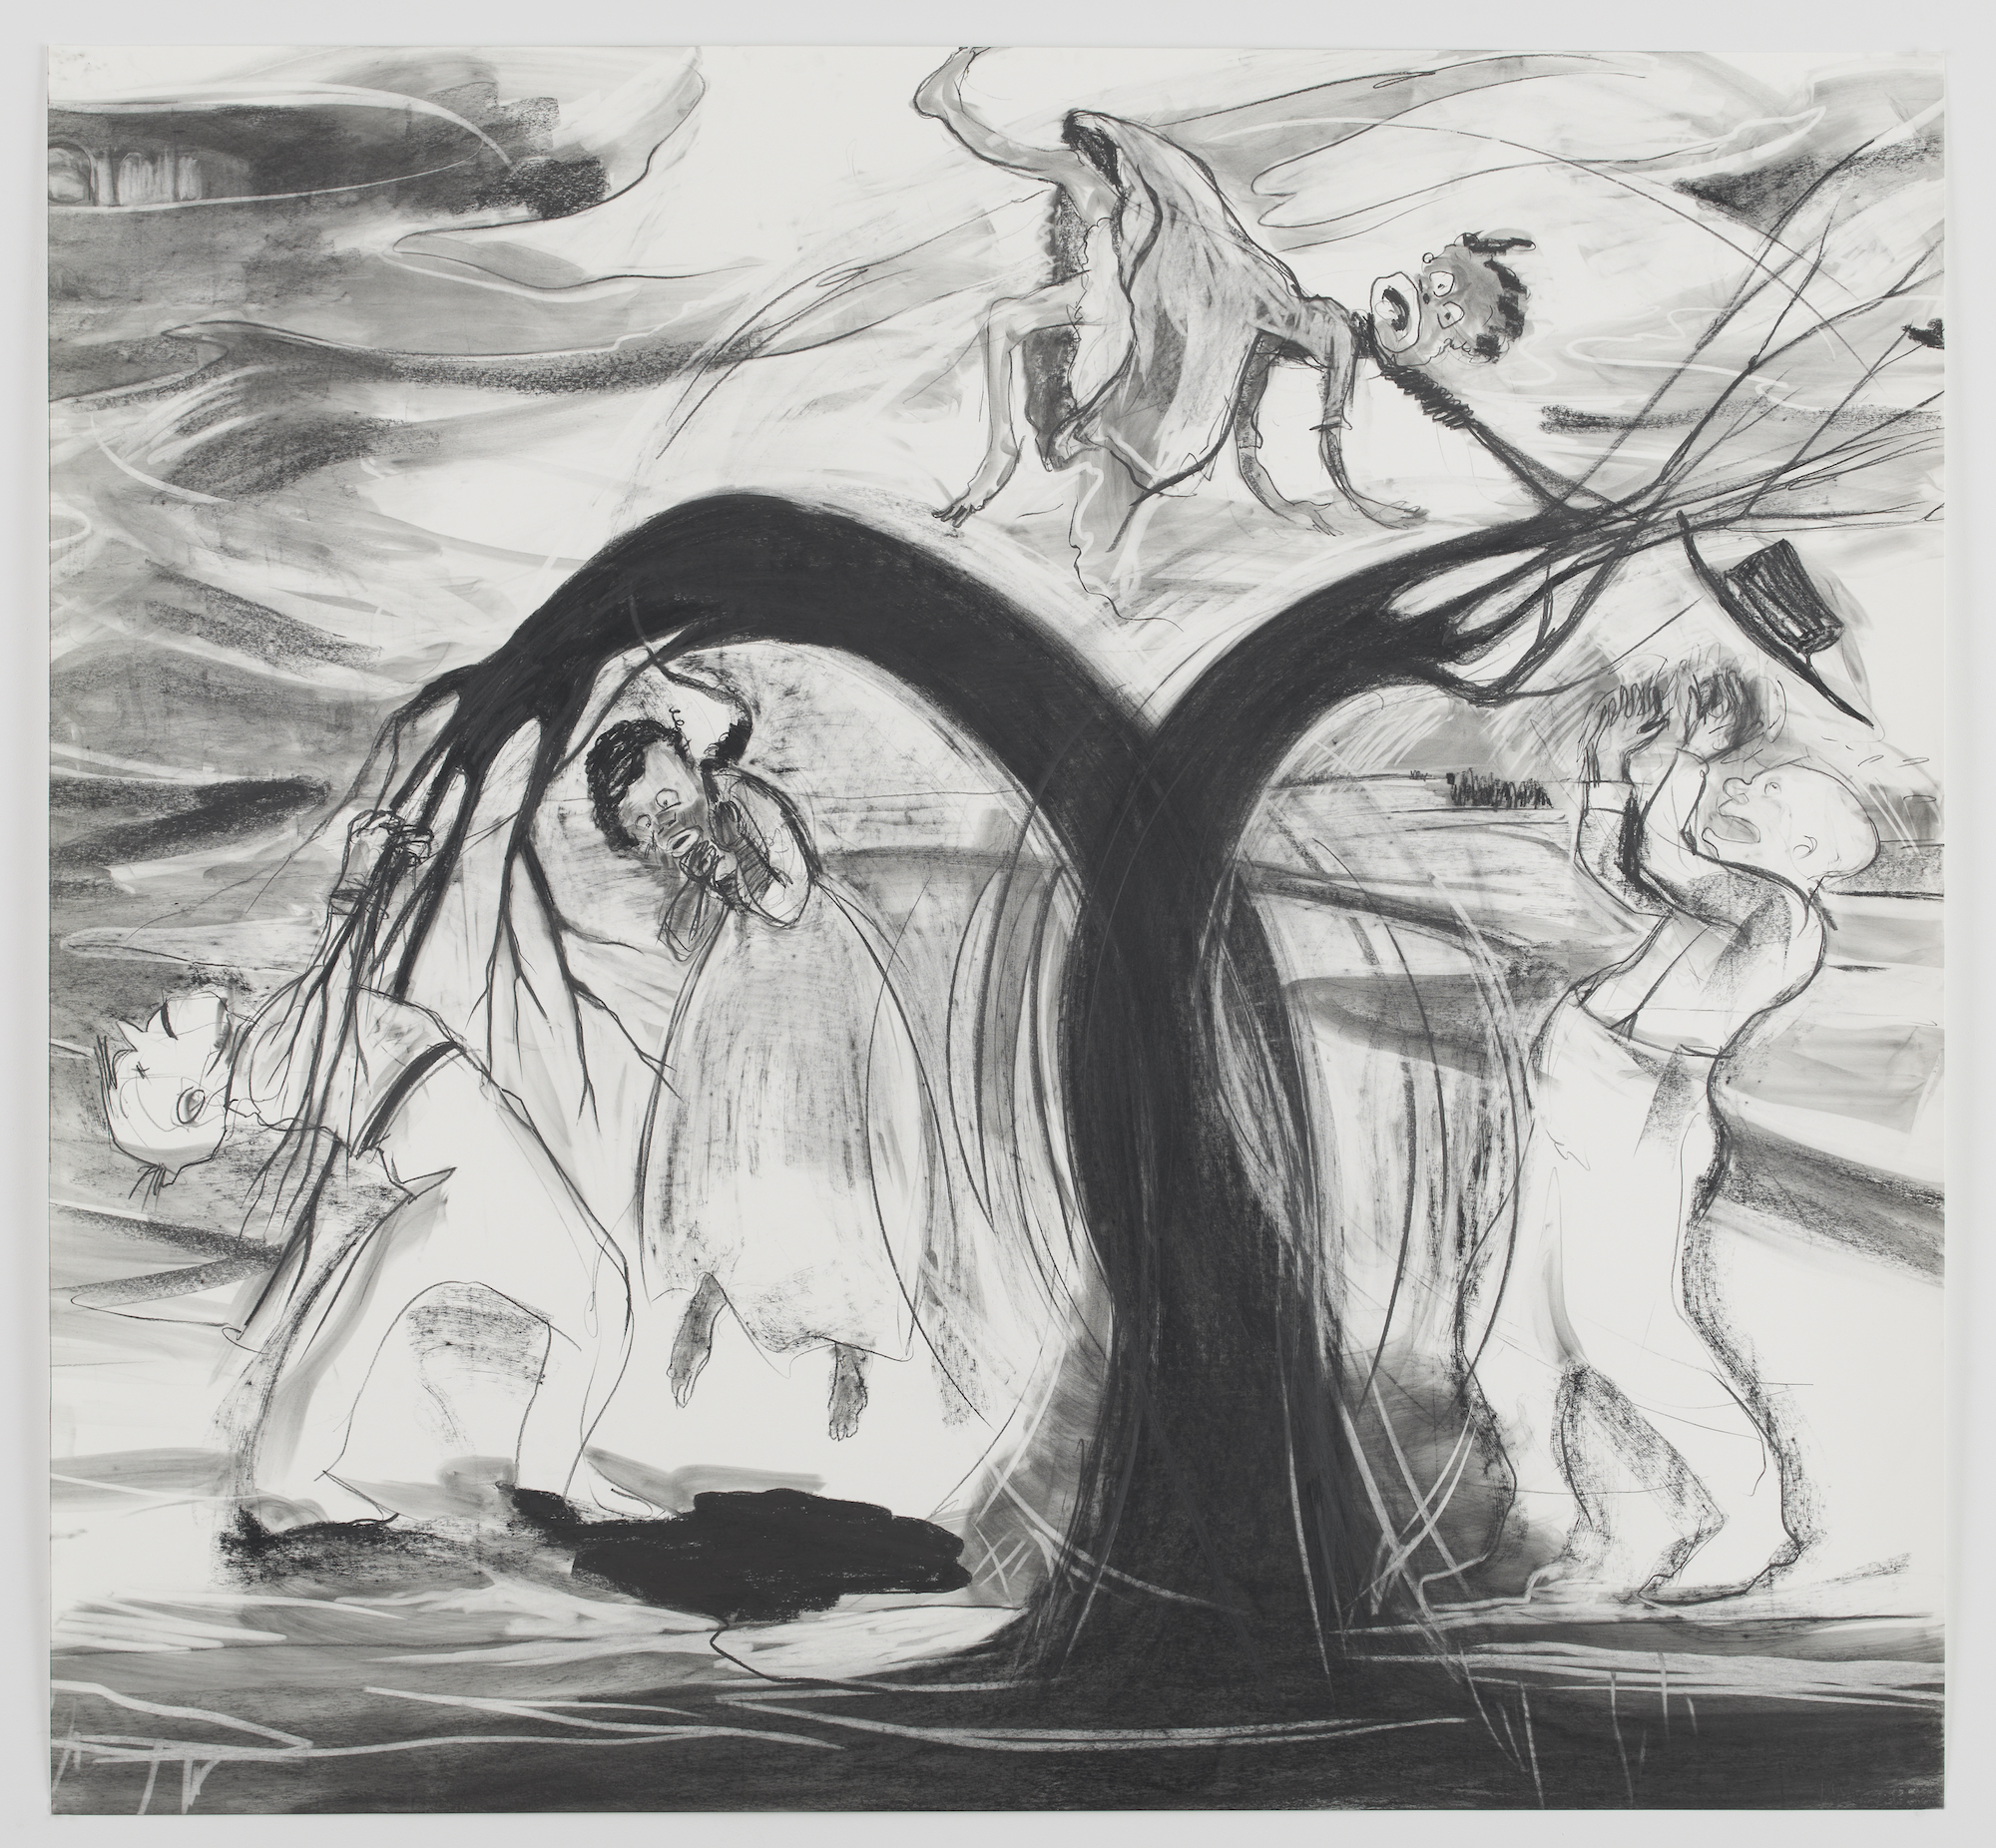  Kara Walker,&nbsp; The Daily Constitution 1878 , 2011. Graphite and pastel on paper, 72 x 77.75 inches. 